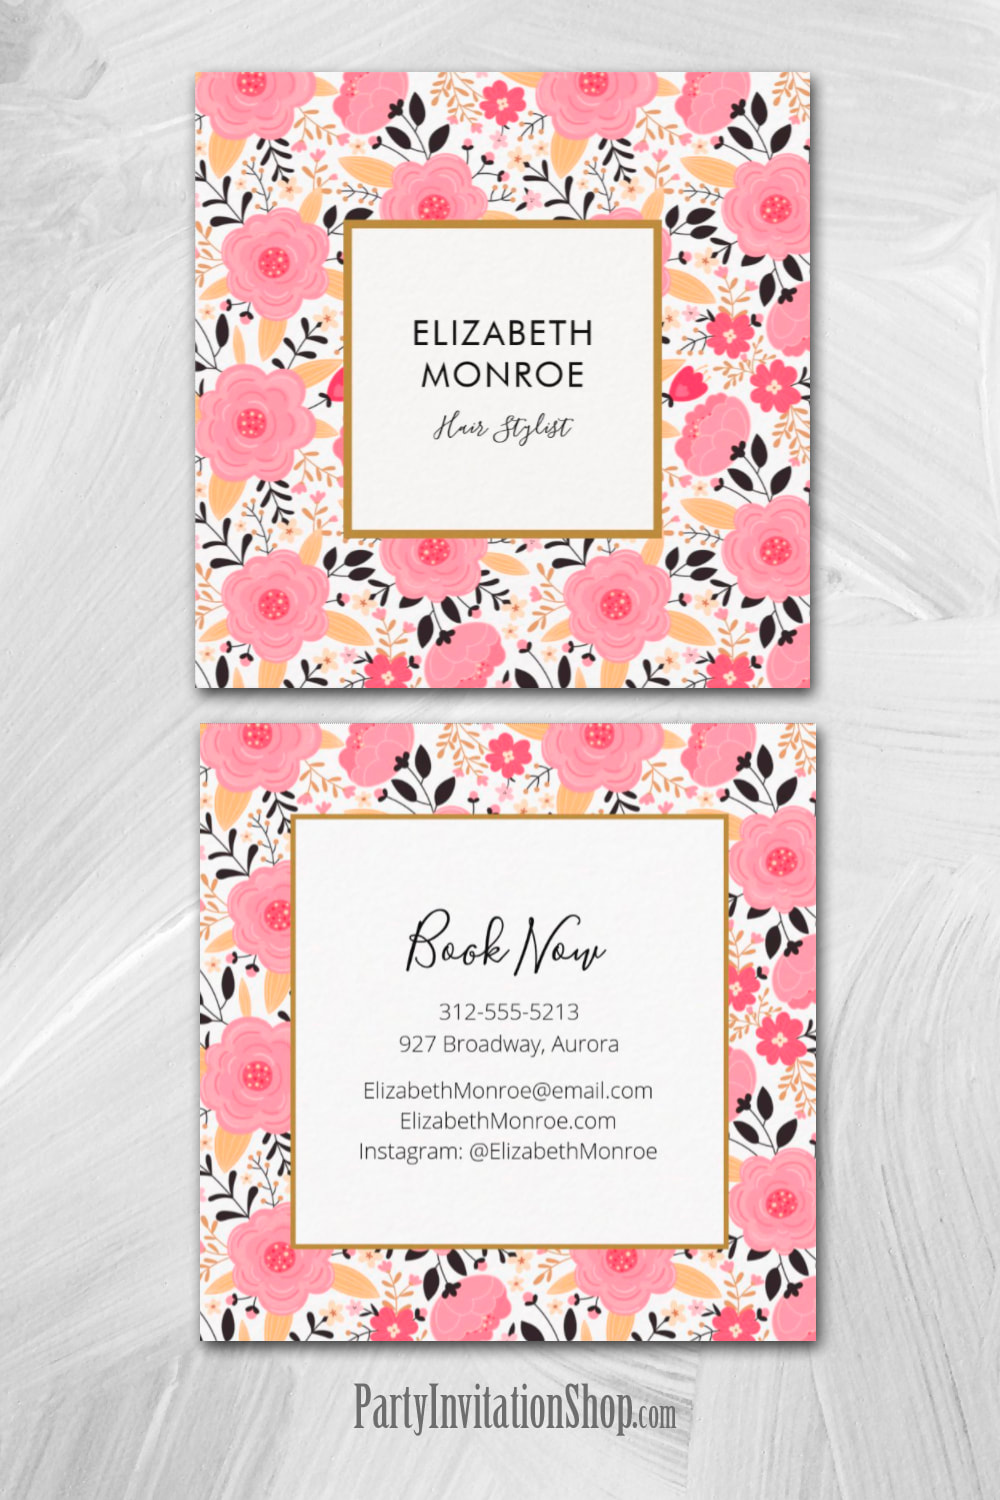 Floral Square Business Cards Hair Stylist, Makeup Artist